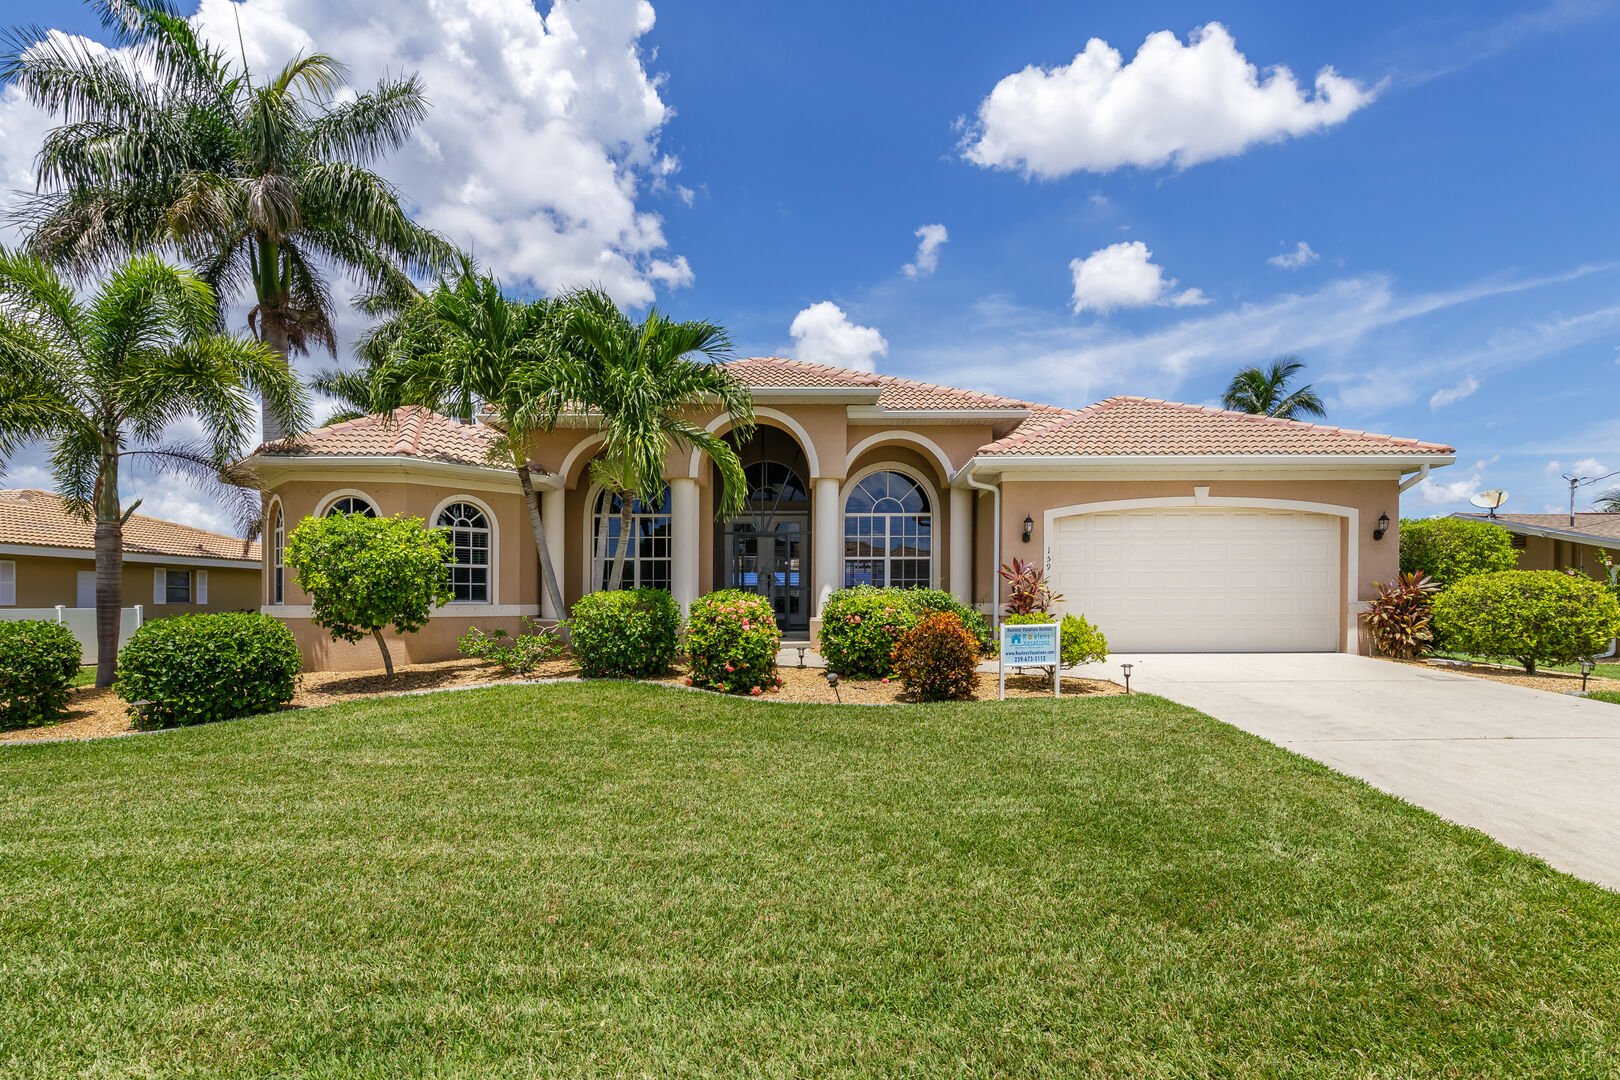 Cape Coral vacation home with 4 bedroom